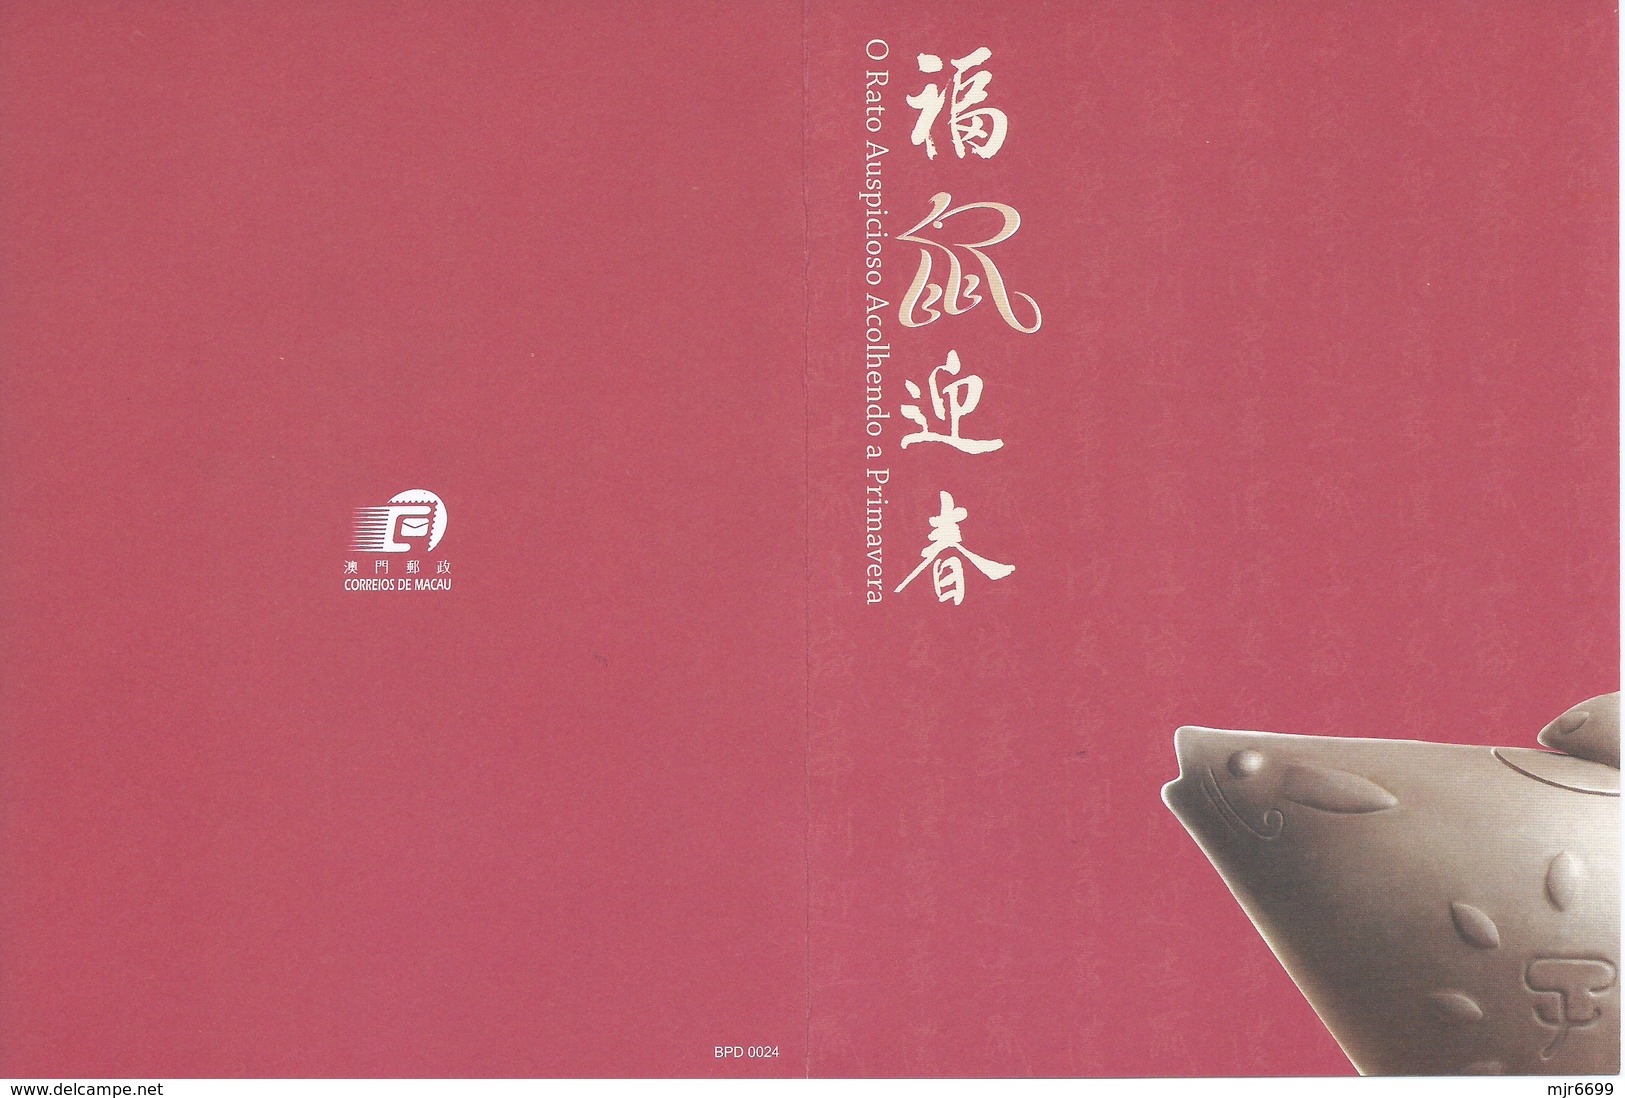 MACAU 2008 LUNAR YEAR OF THE RAT GREETING CARD & POSTAGE PAID COVER FIRST DAY USAGE - Ganzsachen